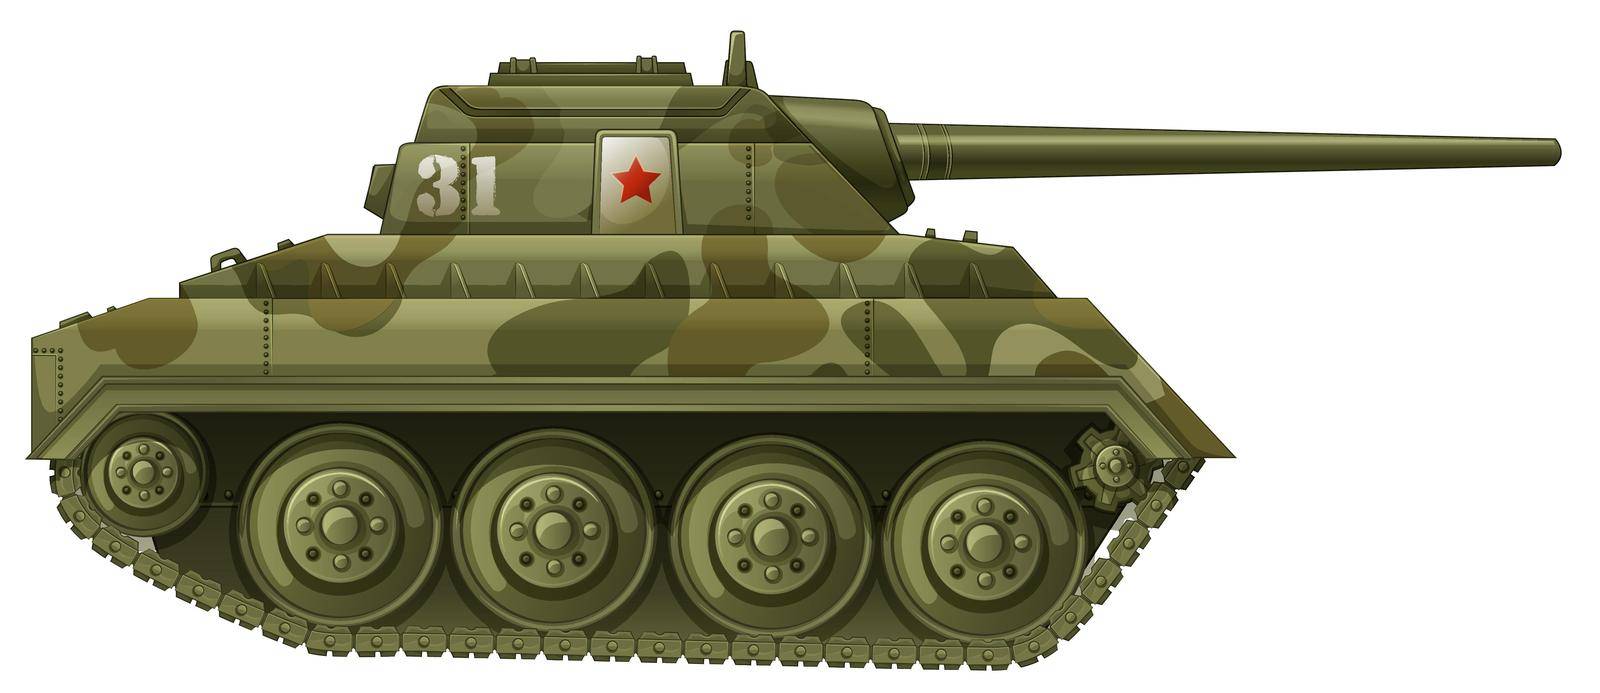 Illustration of an armoured tank on a white background